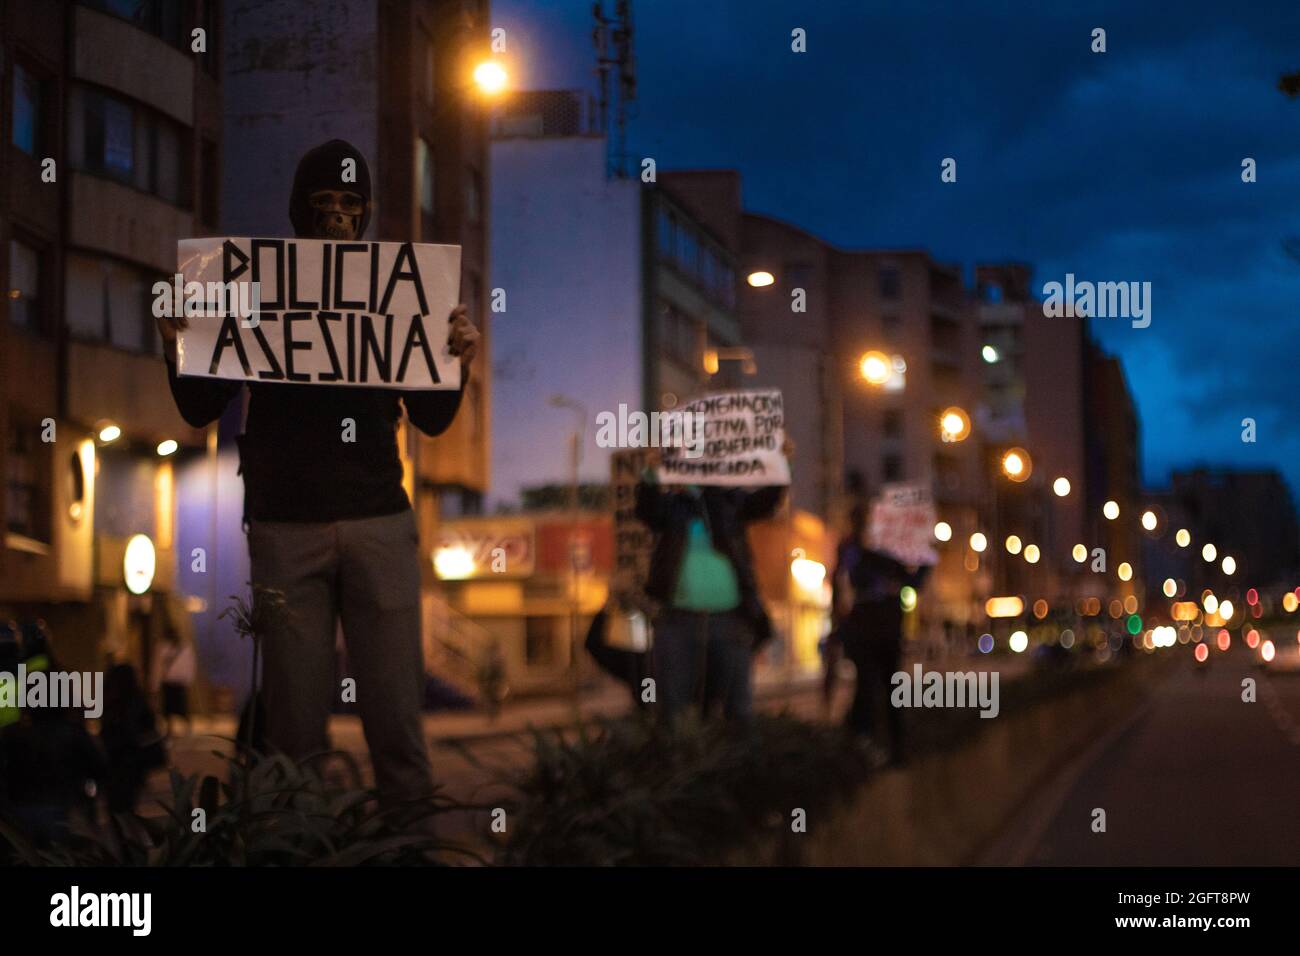 Demonstrators hold signs against police brutality during a rally organized by students of the Universidad Distrital, after a few days back Esteban Mosquera, a social leader and community member was killed two years after loosing his eye on a police brutality case, in Bogota, Colombia on August 26, 2021. Stock Photo